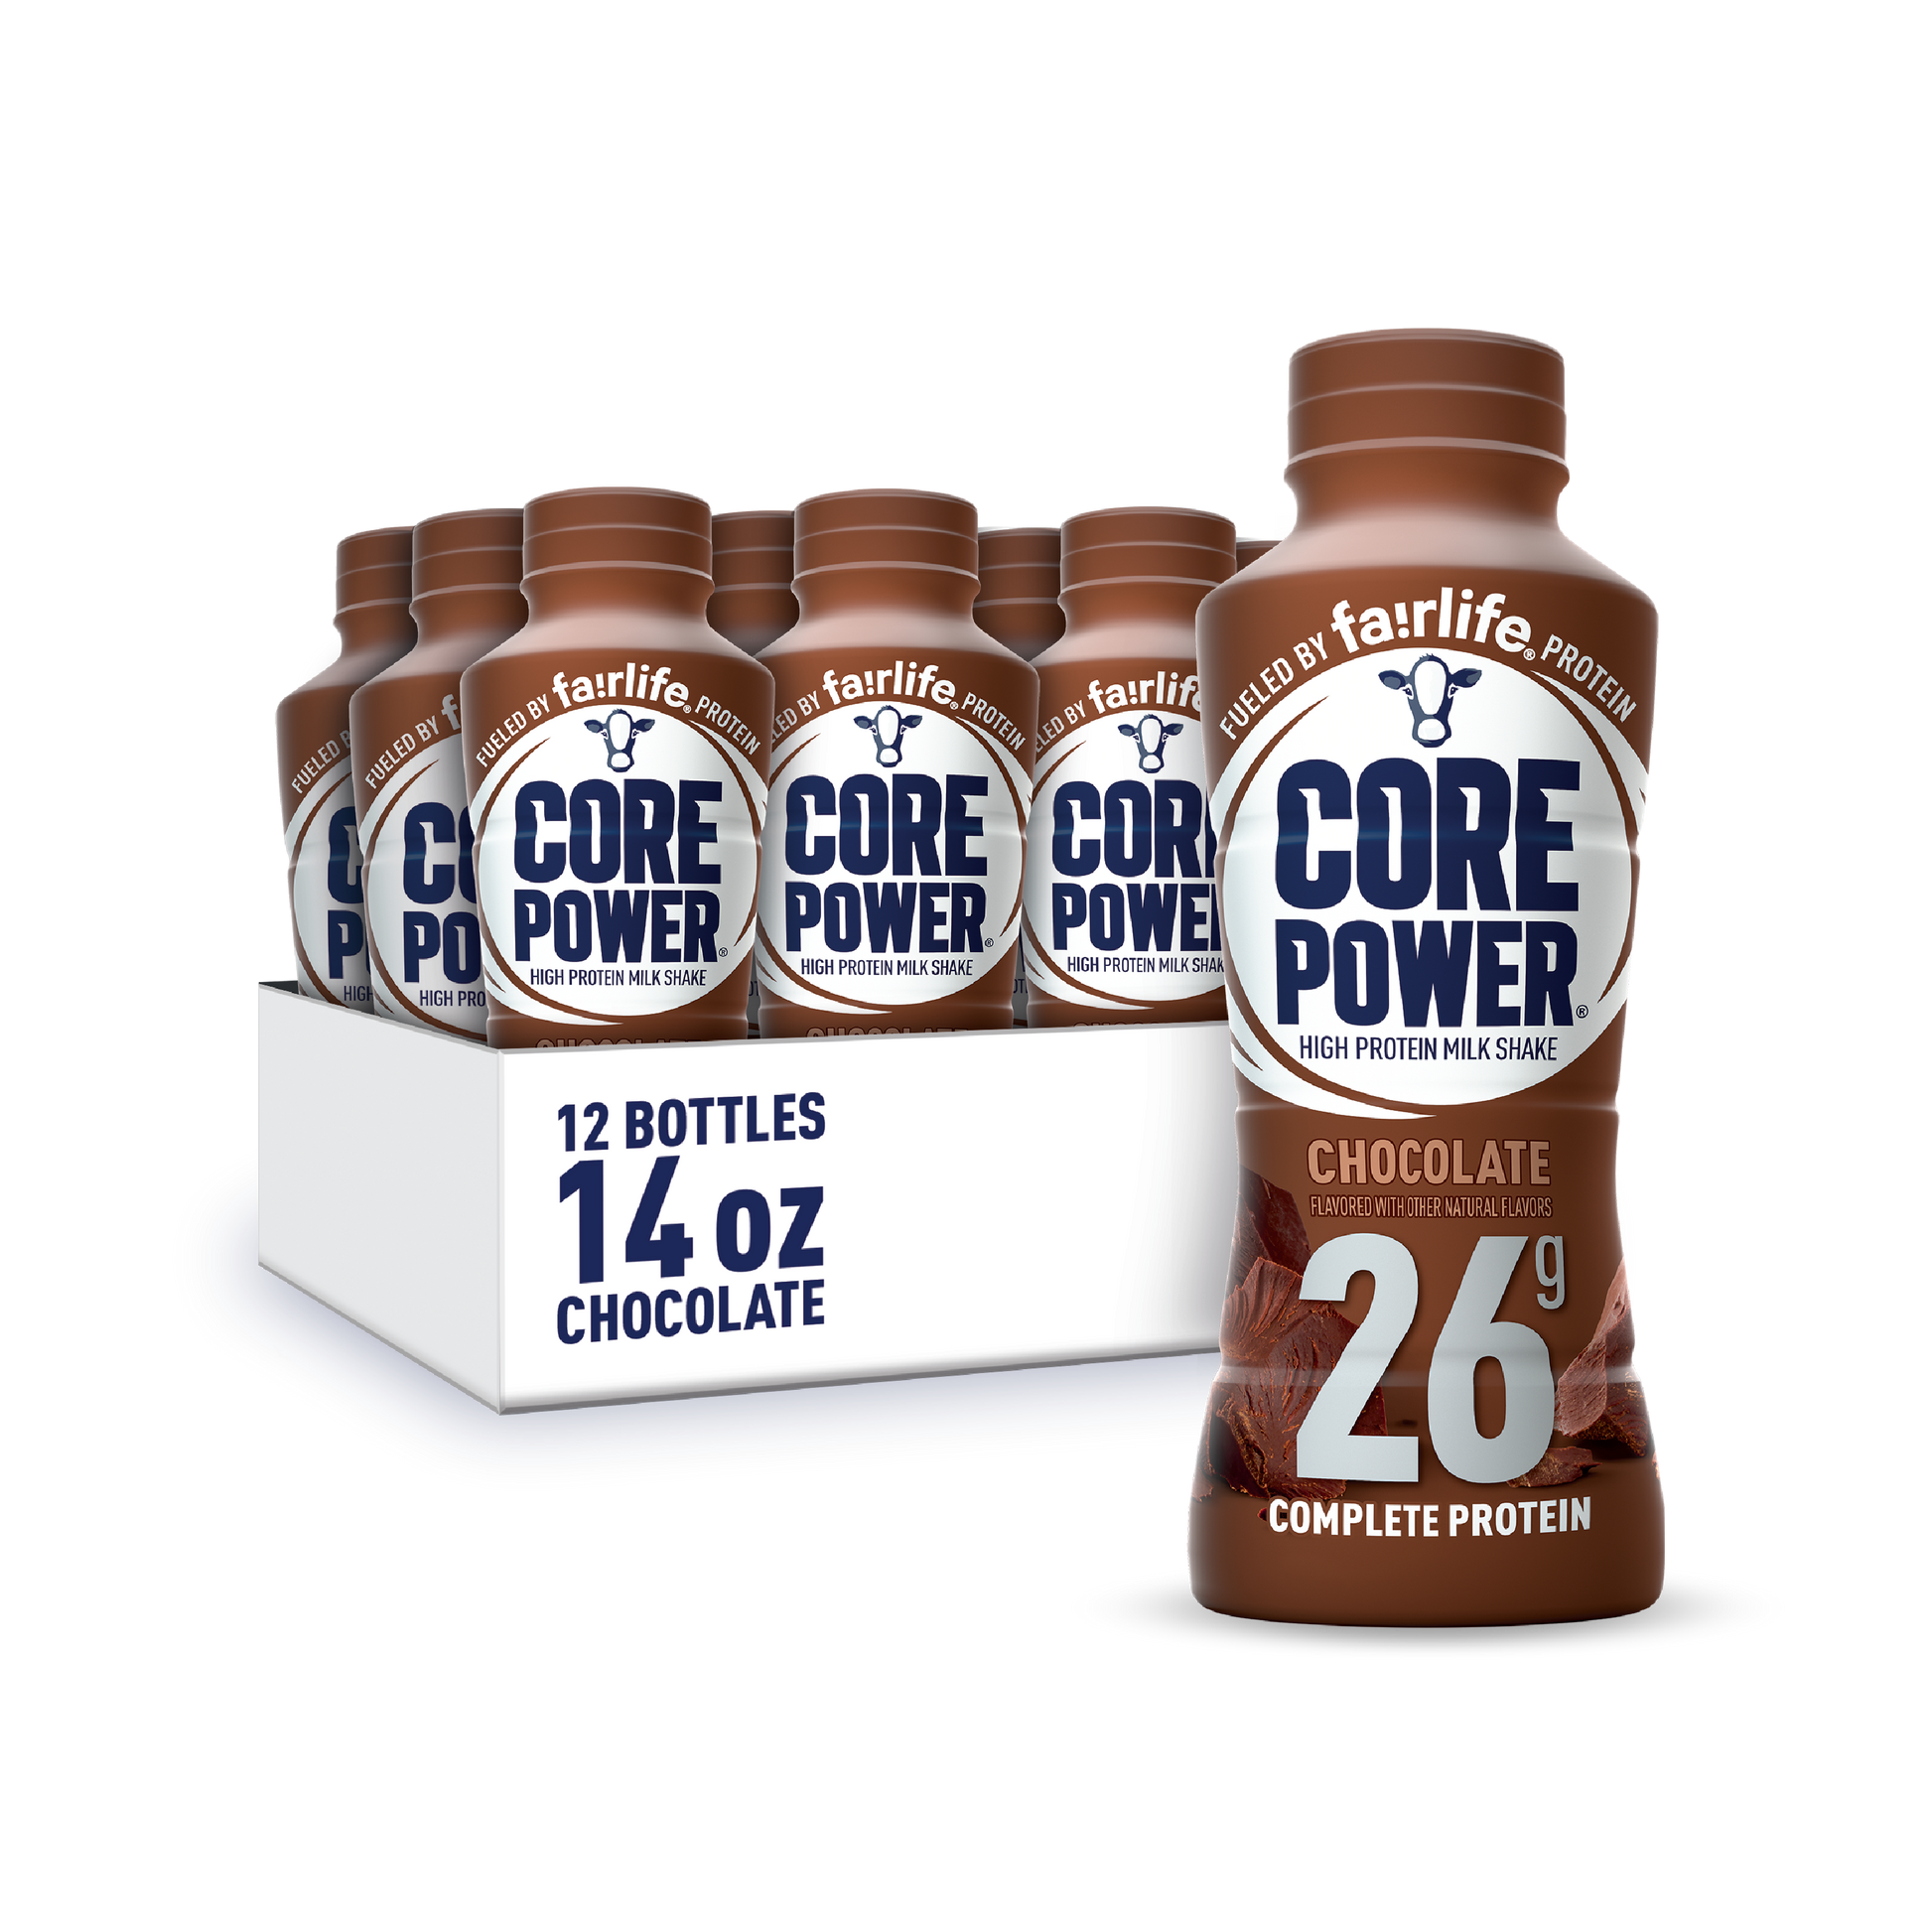 fairlife Core Power 26g high quality protein shake 14 fl oz (pack of 12); Chocolate